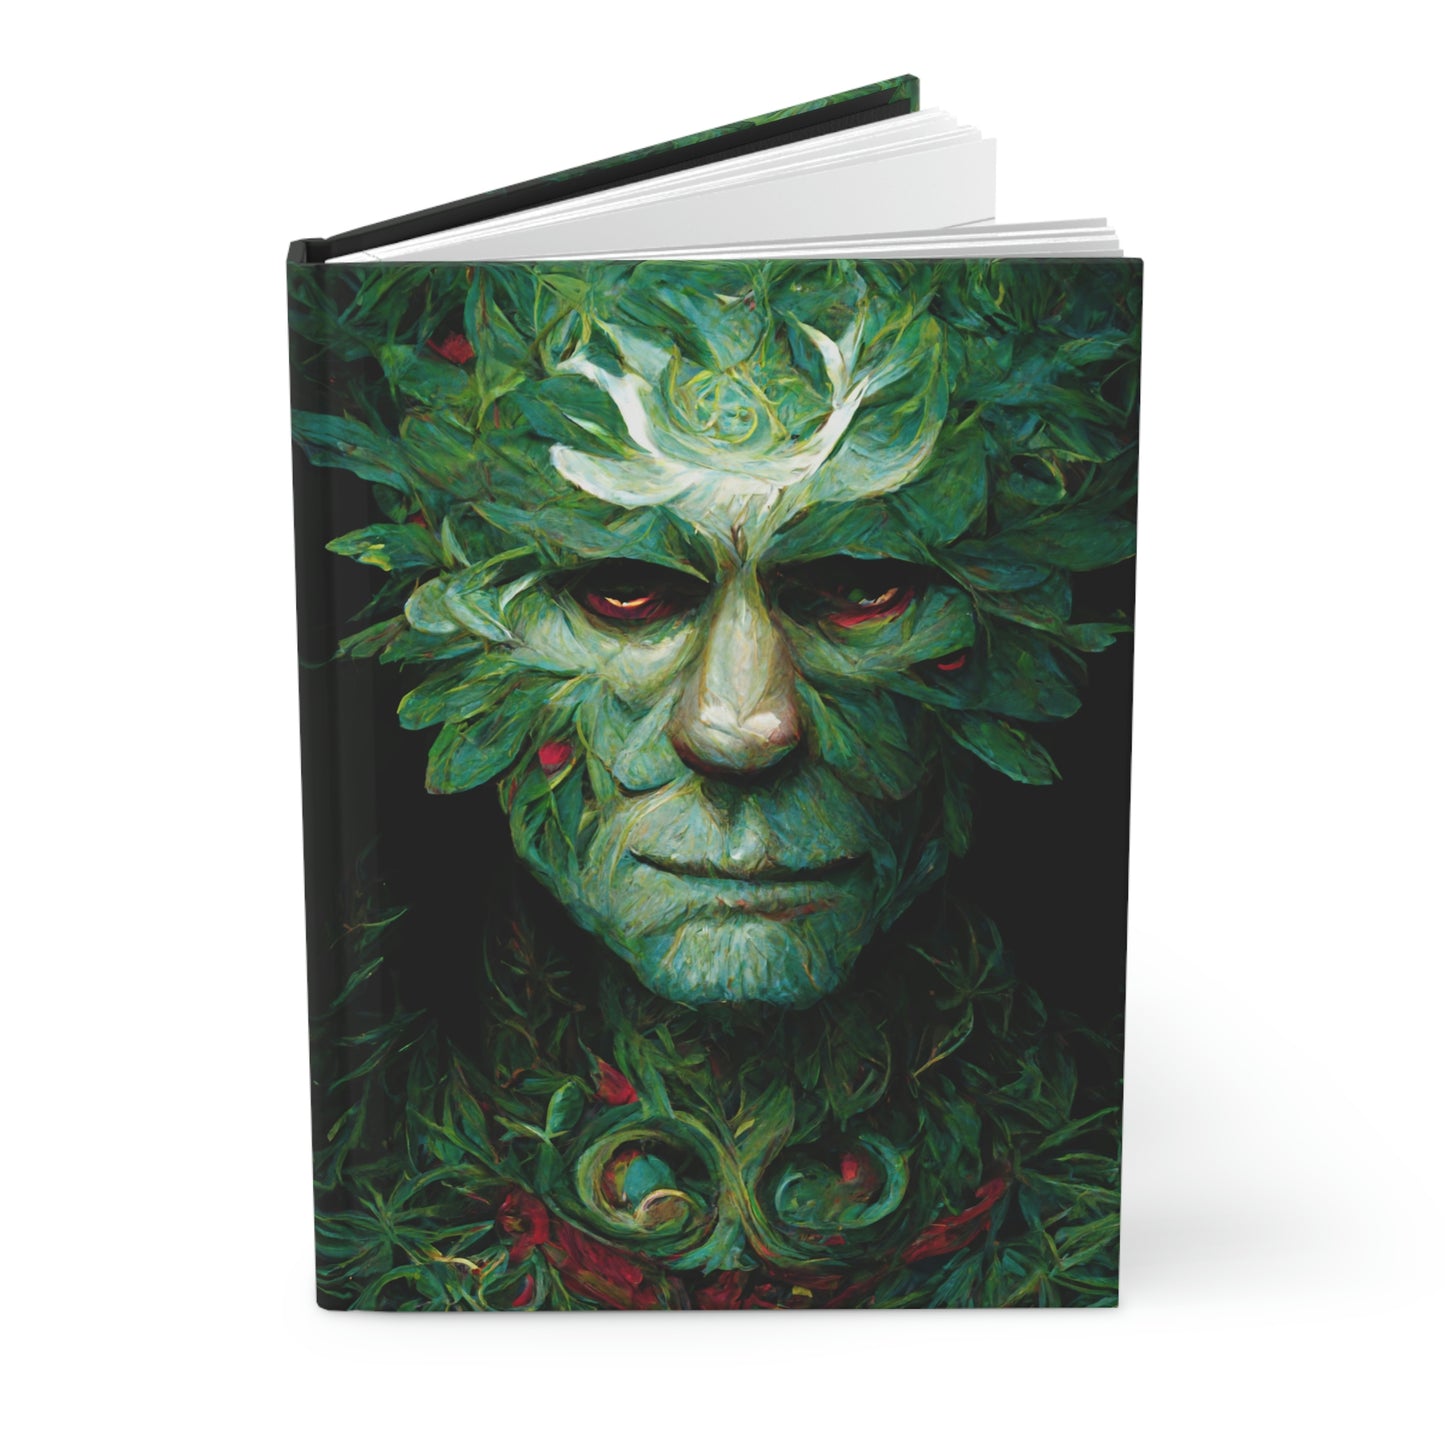 Book of Shadows - The Green Man - Hardcover Grimoire for Witches, Pagans, Wiccans - 150 lined page notebook Holly King